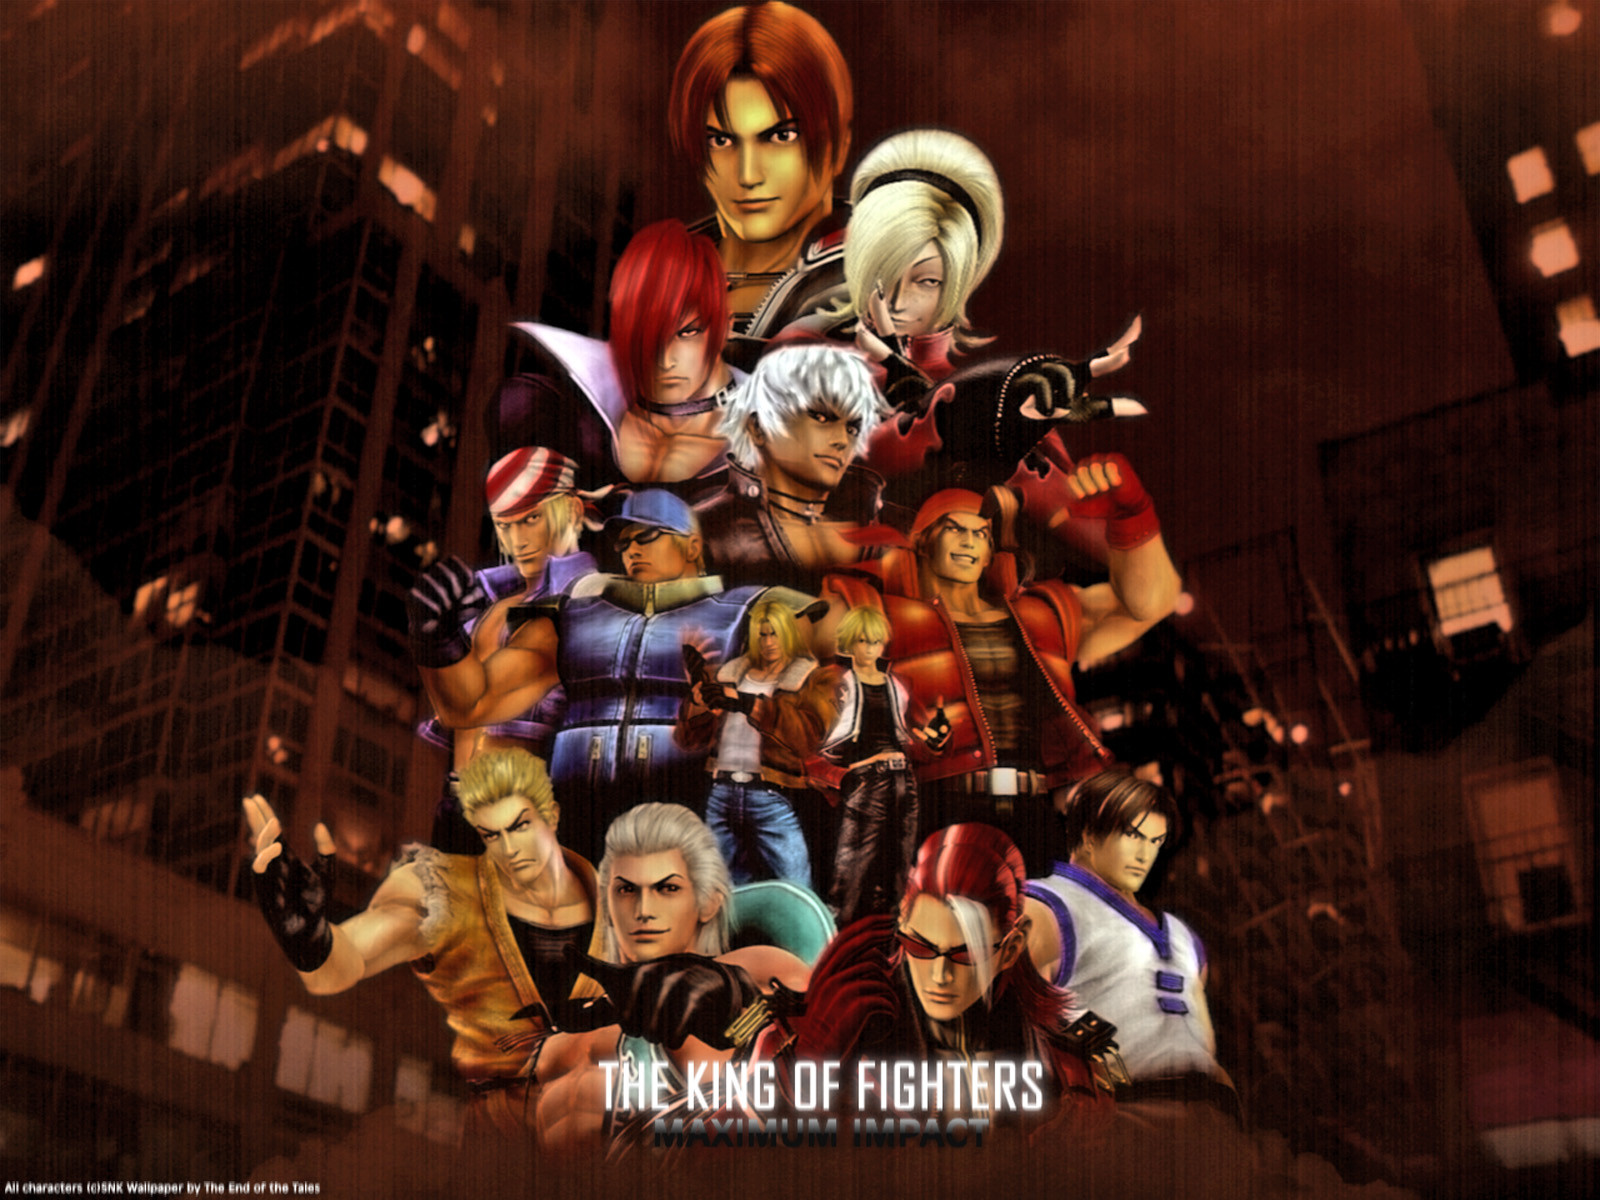 the king of fighters wallpaper,action adventure game,fictional character,adventure game,games,pc game